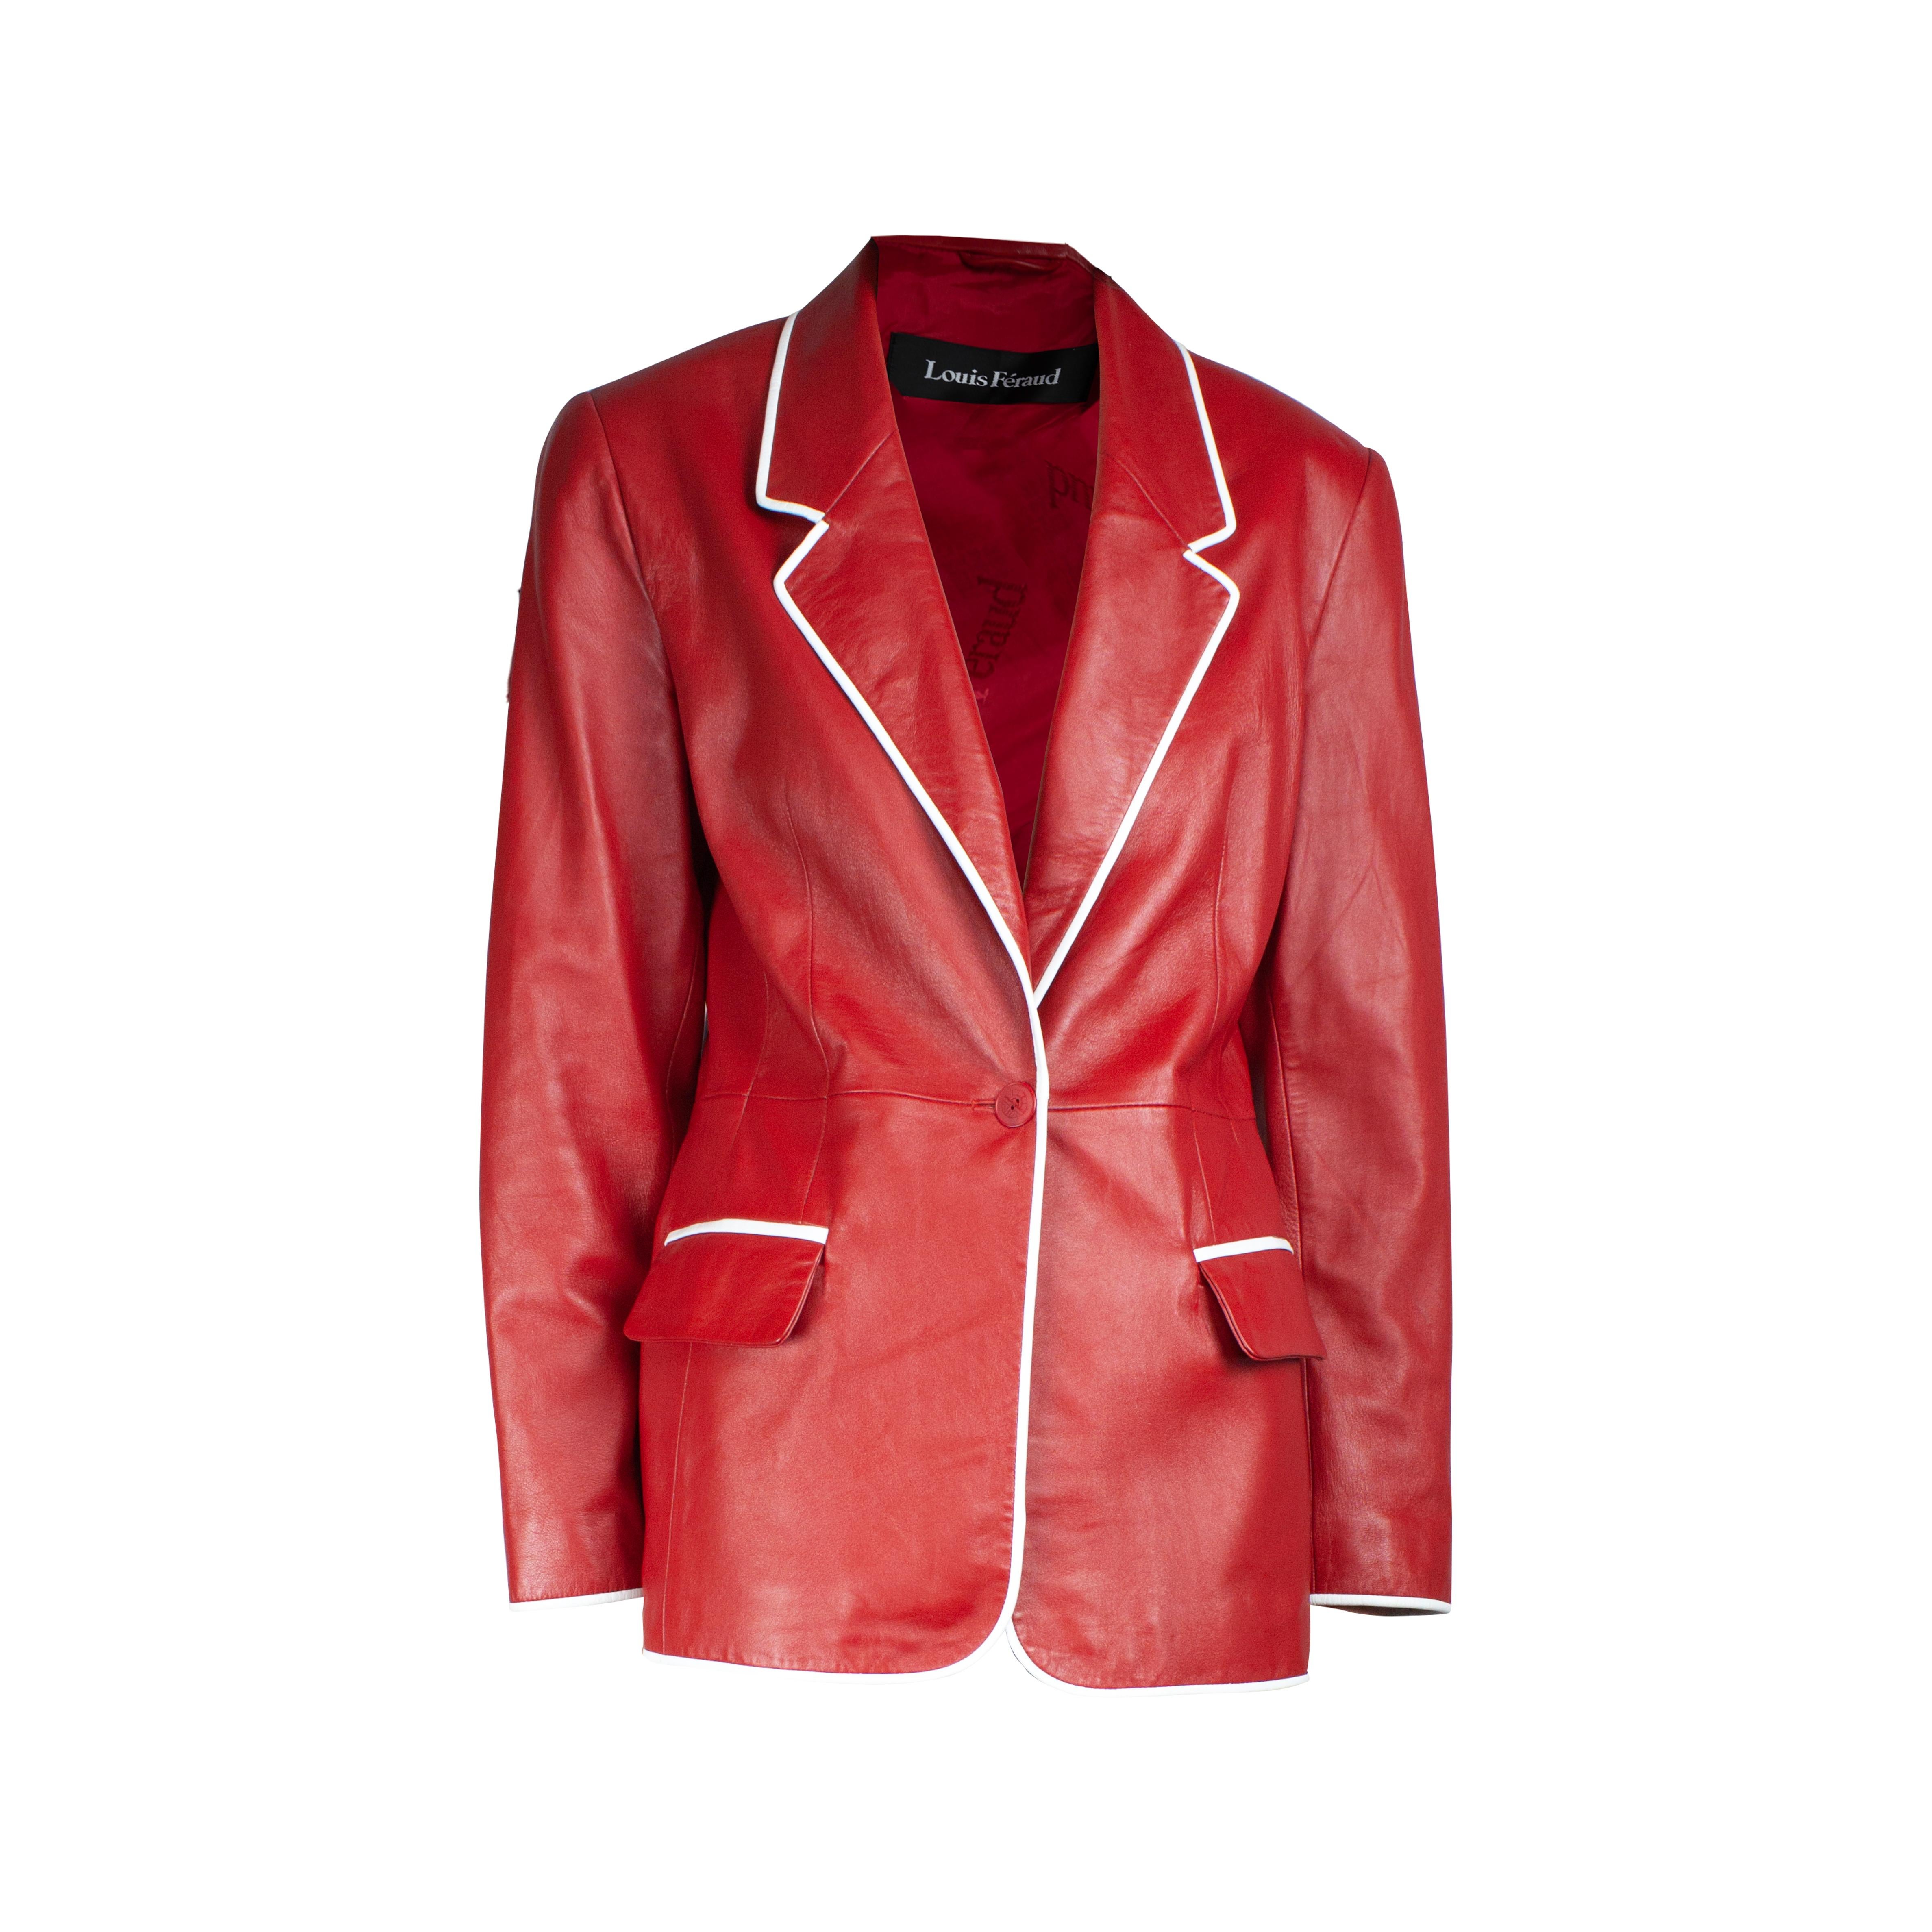 Louis Feraud red and white tailored leather jacket.circa 1980s For Sale